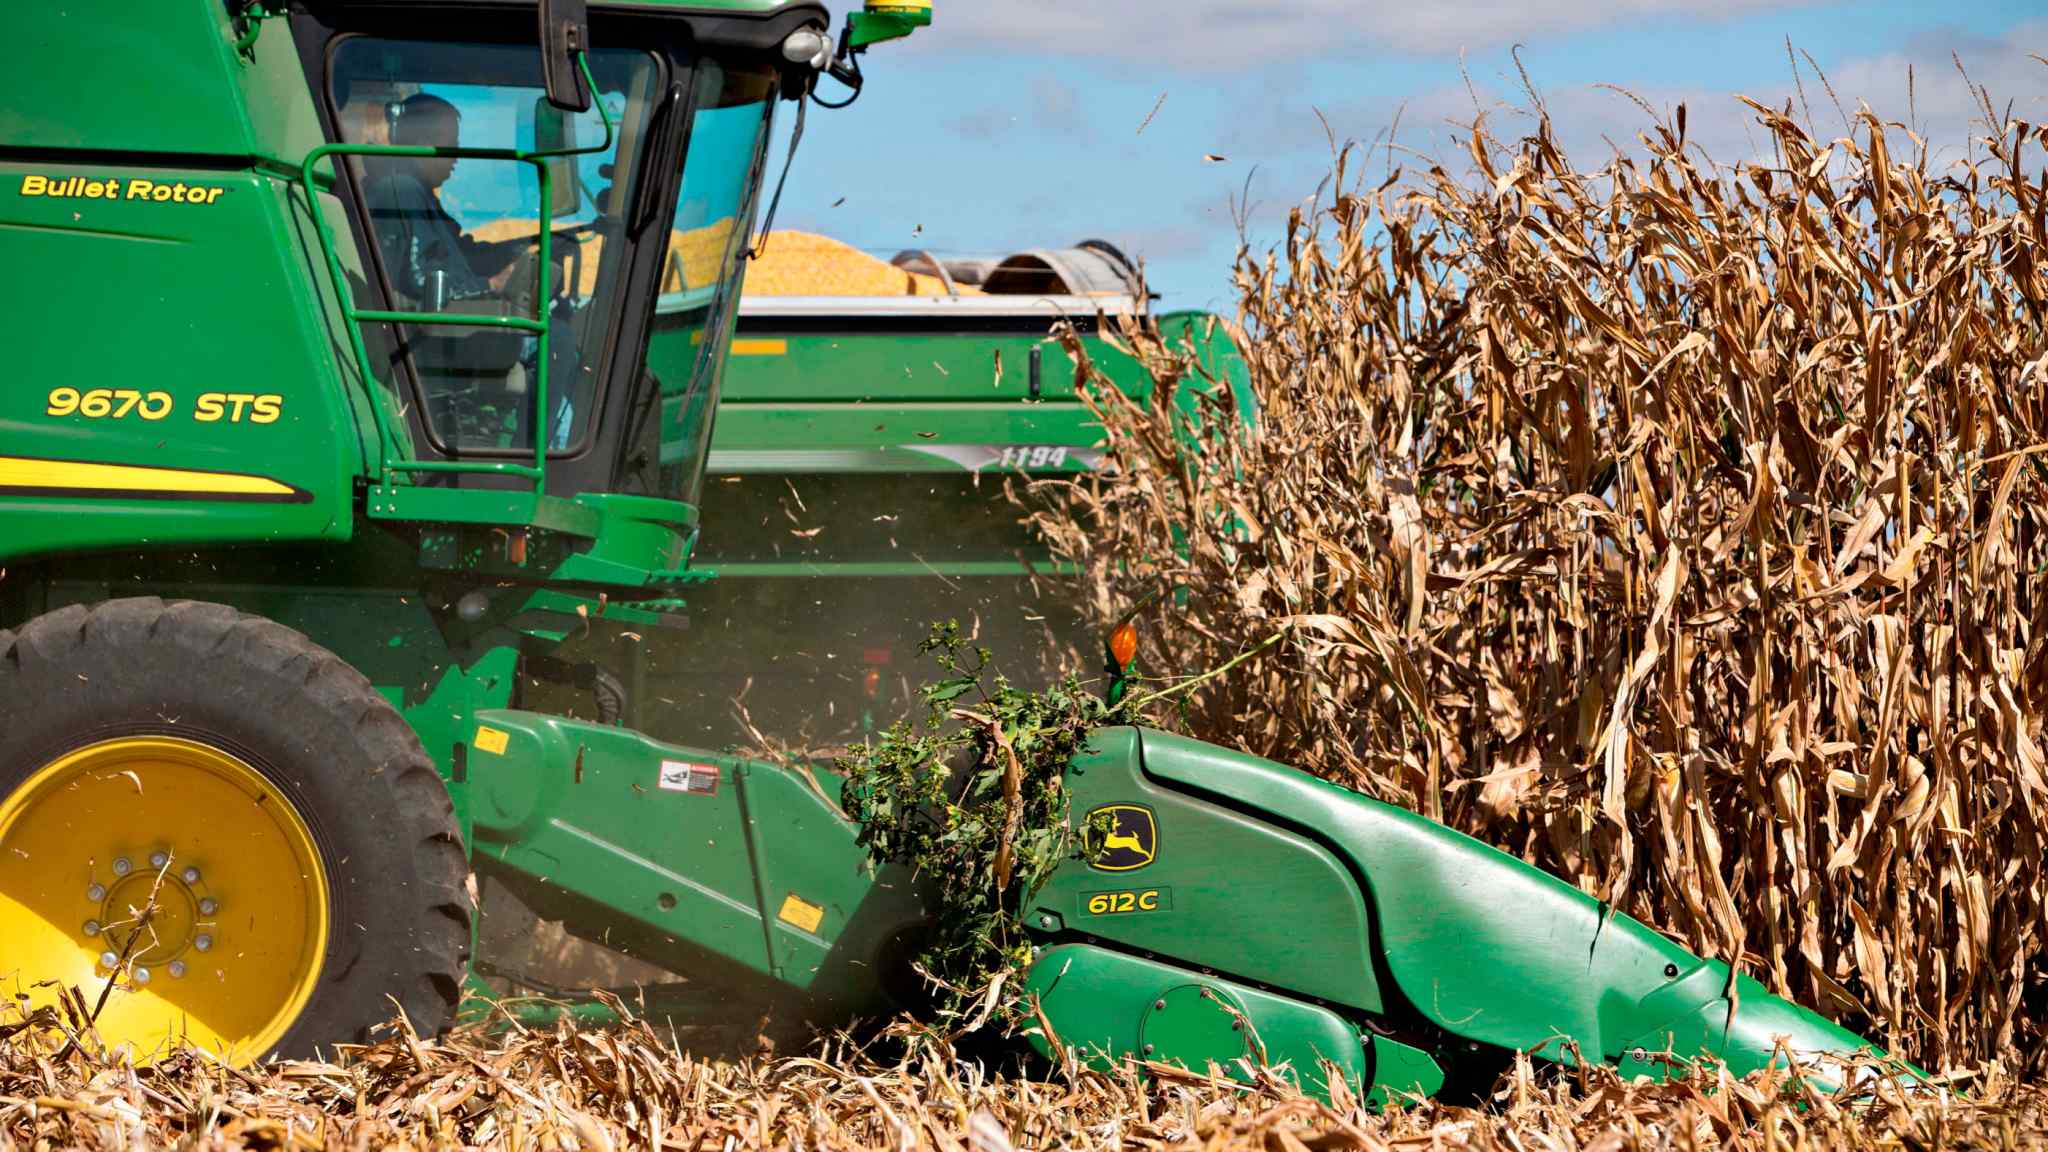 Live news updates: Deere cuts profit forecast on higher costs but optimistic on 2023 orders